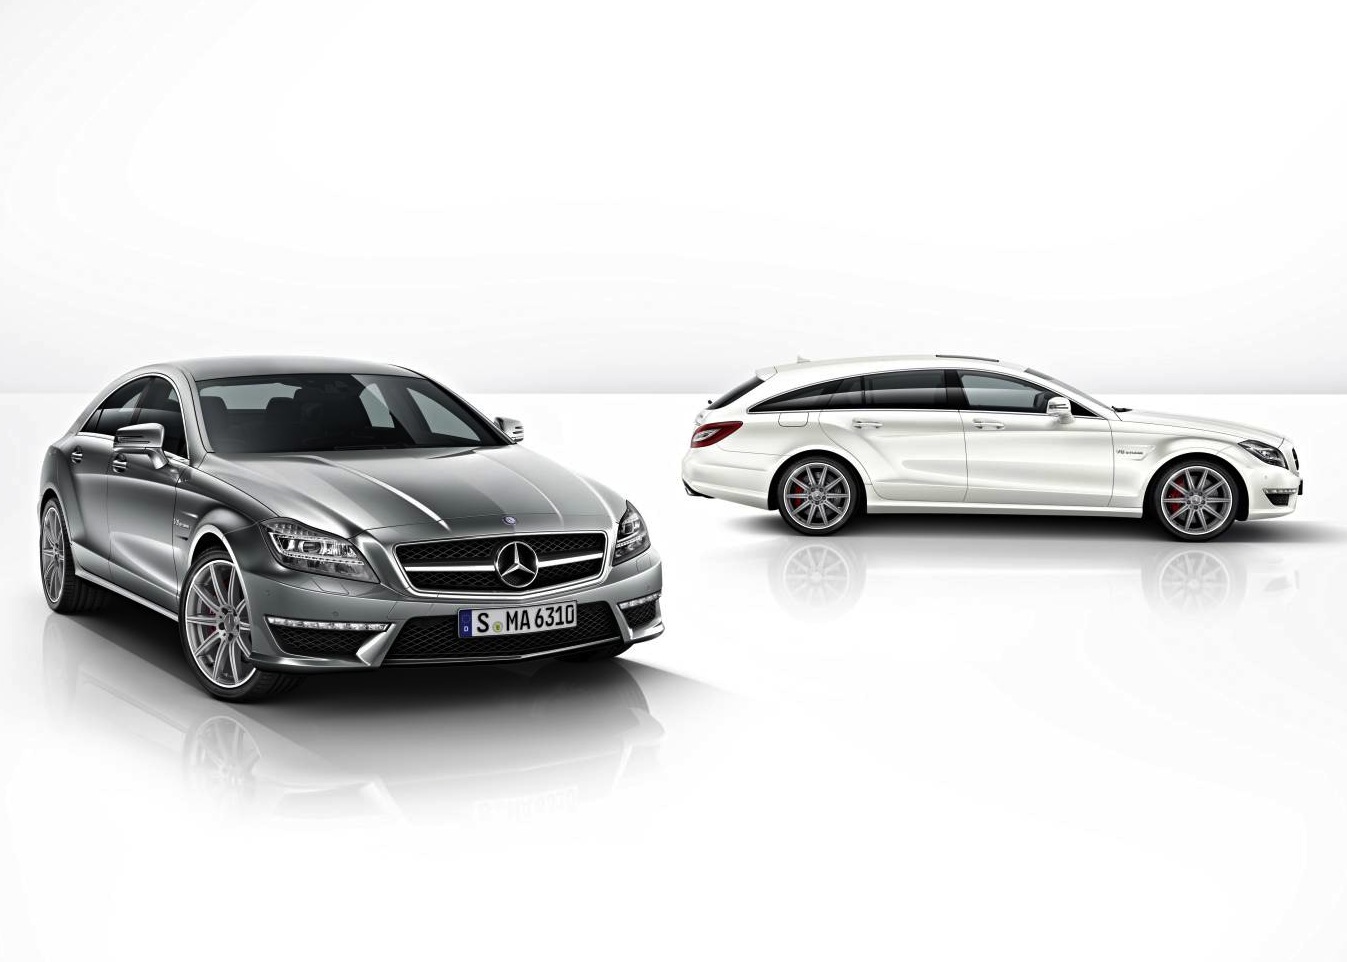 Mercedes-Benz CLS 63 AMG ‘S’ now on sale in Australia